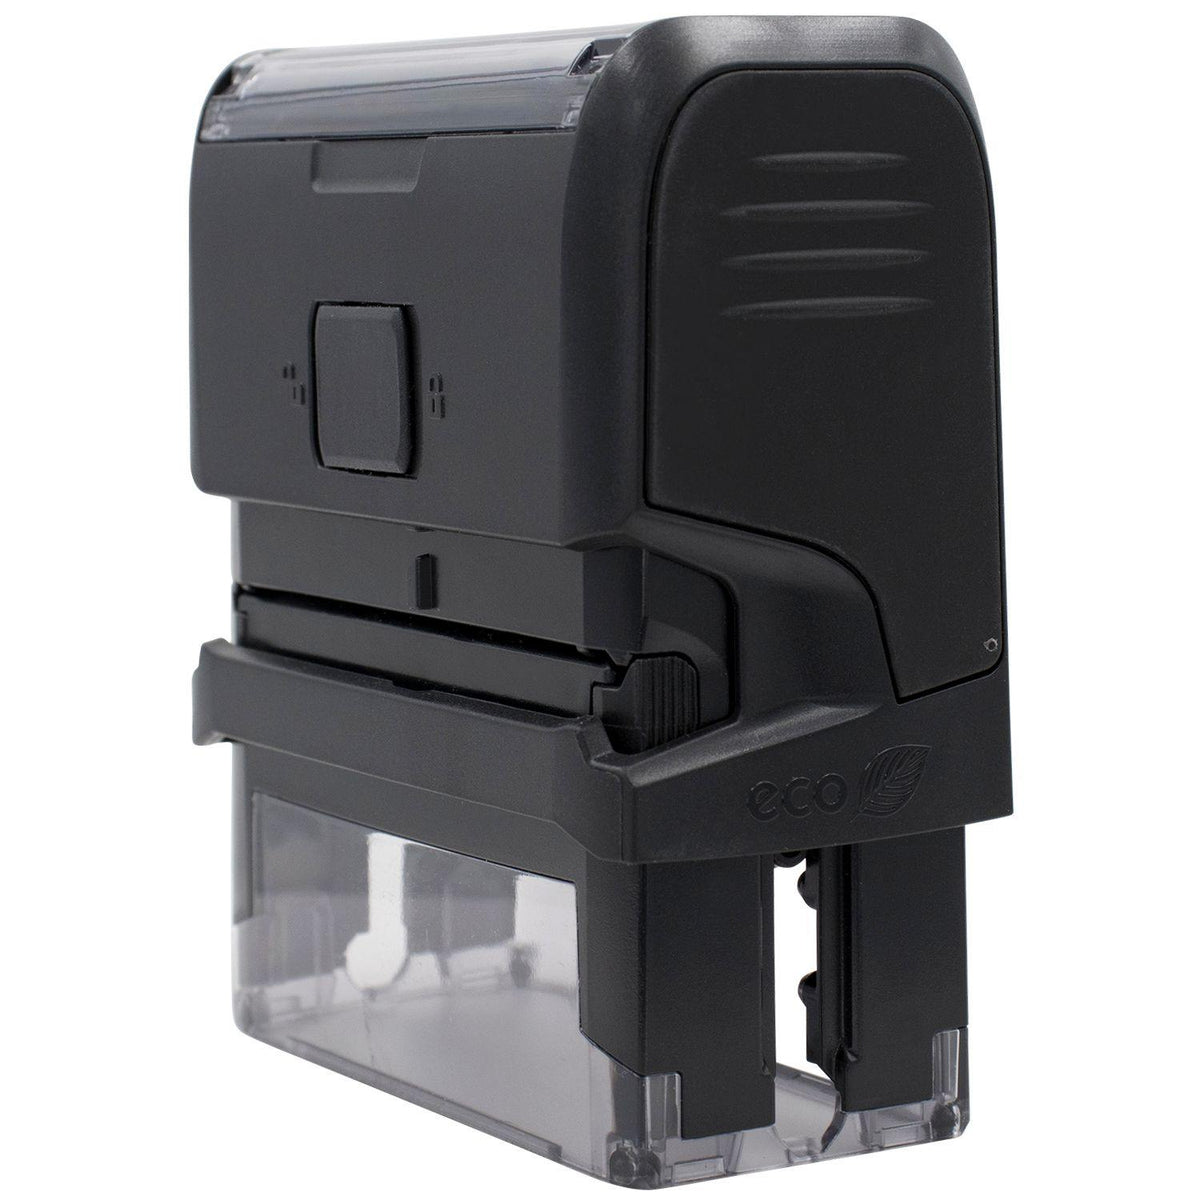 Large Self-Inking Spoiled Stamp - Engineer Seal Stamps - Brand_Trodat, Impression Size_Large, Stamp Type_Self-Inking Stamp, Type of Use_Business, Type of Use_General